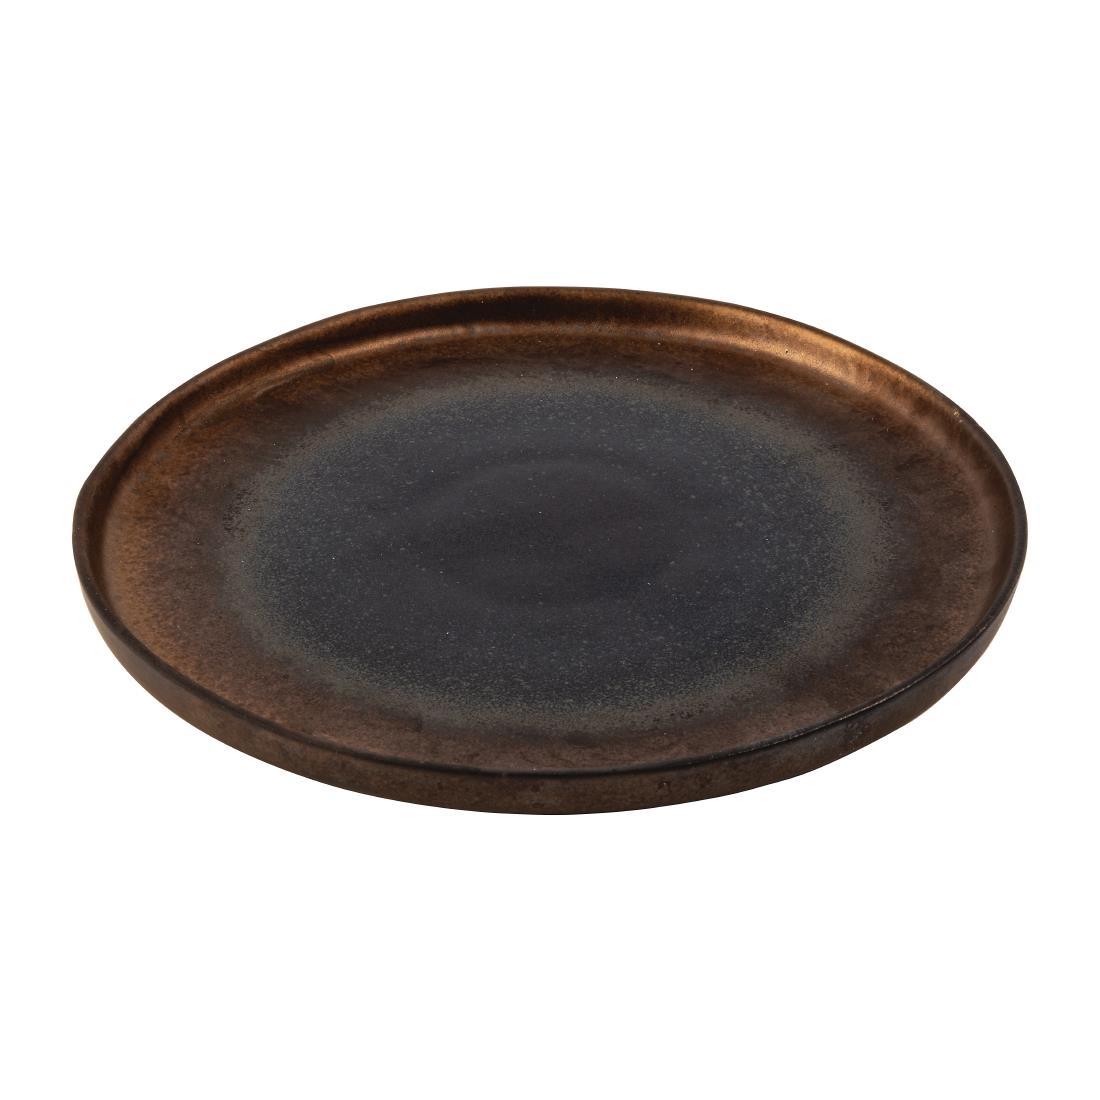 Olympia Ochre Flat Plates 260mm (Pack of 6) - FC285  - 2